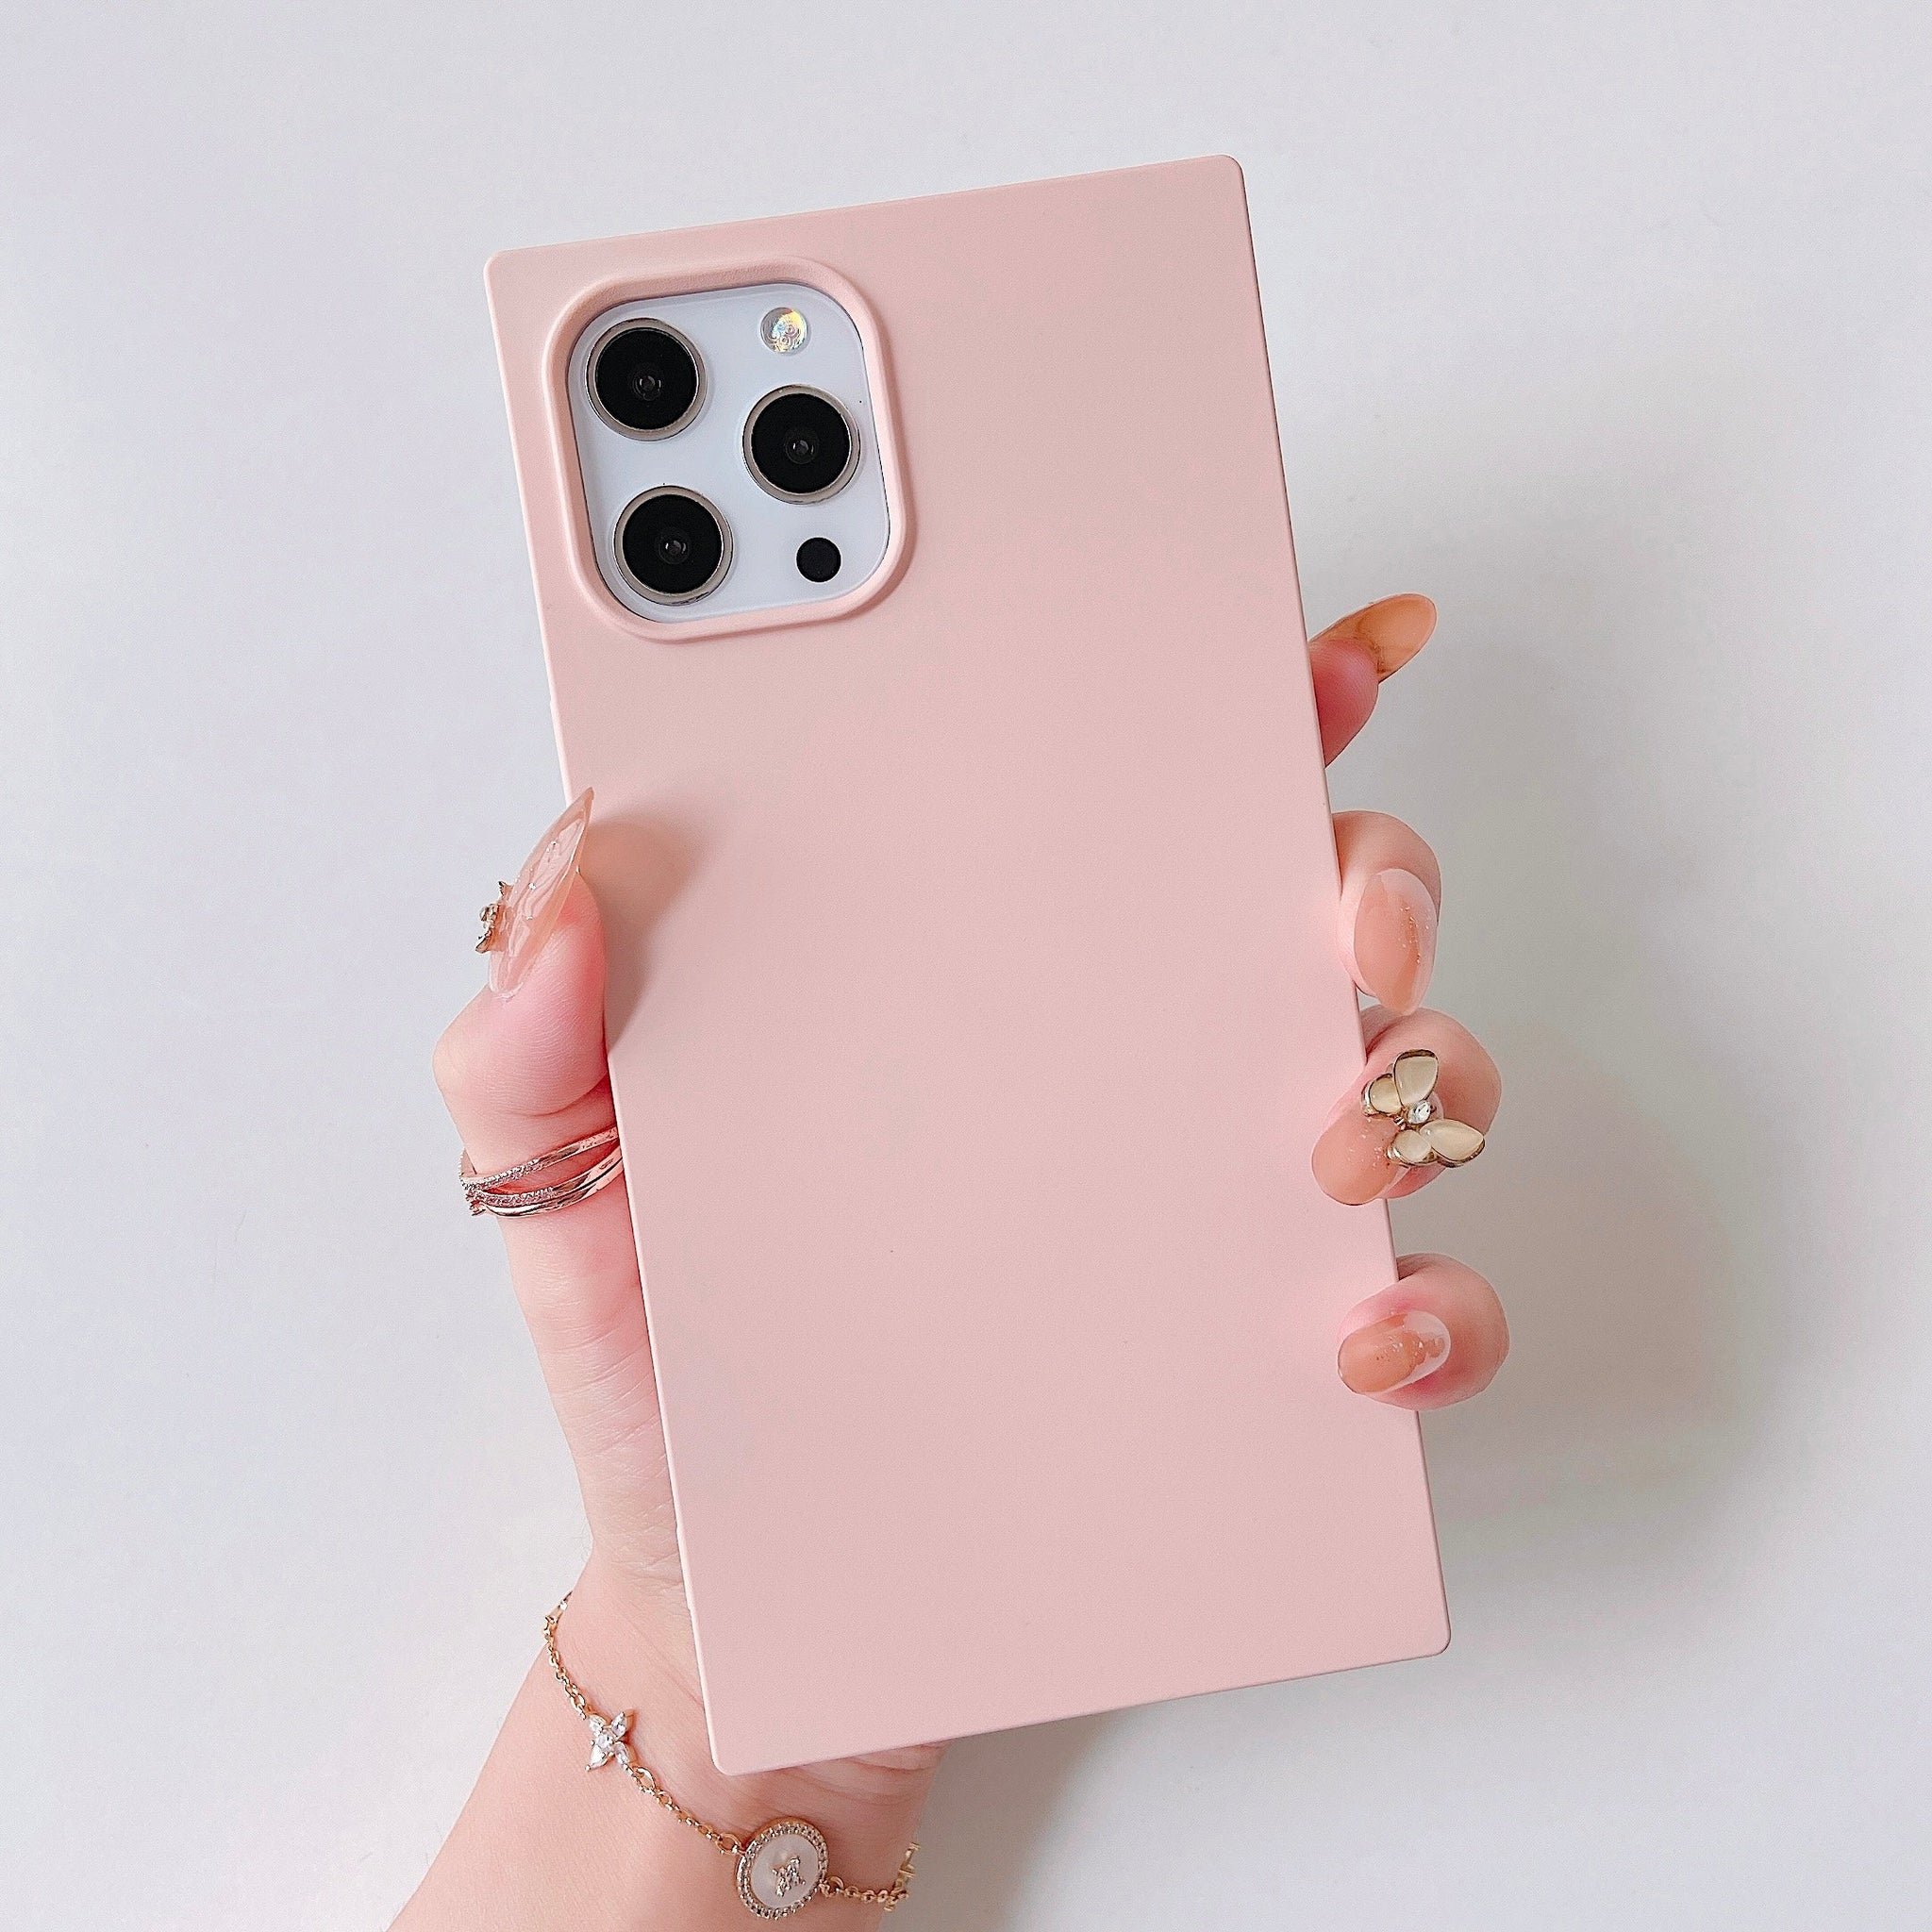 iPhone 11 Pro Case Square Silicone (Chalk Pink)